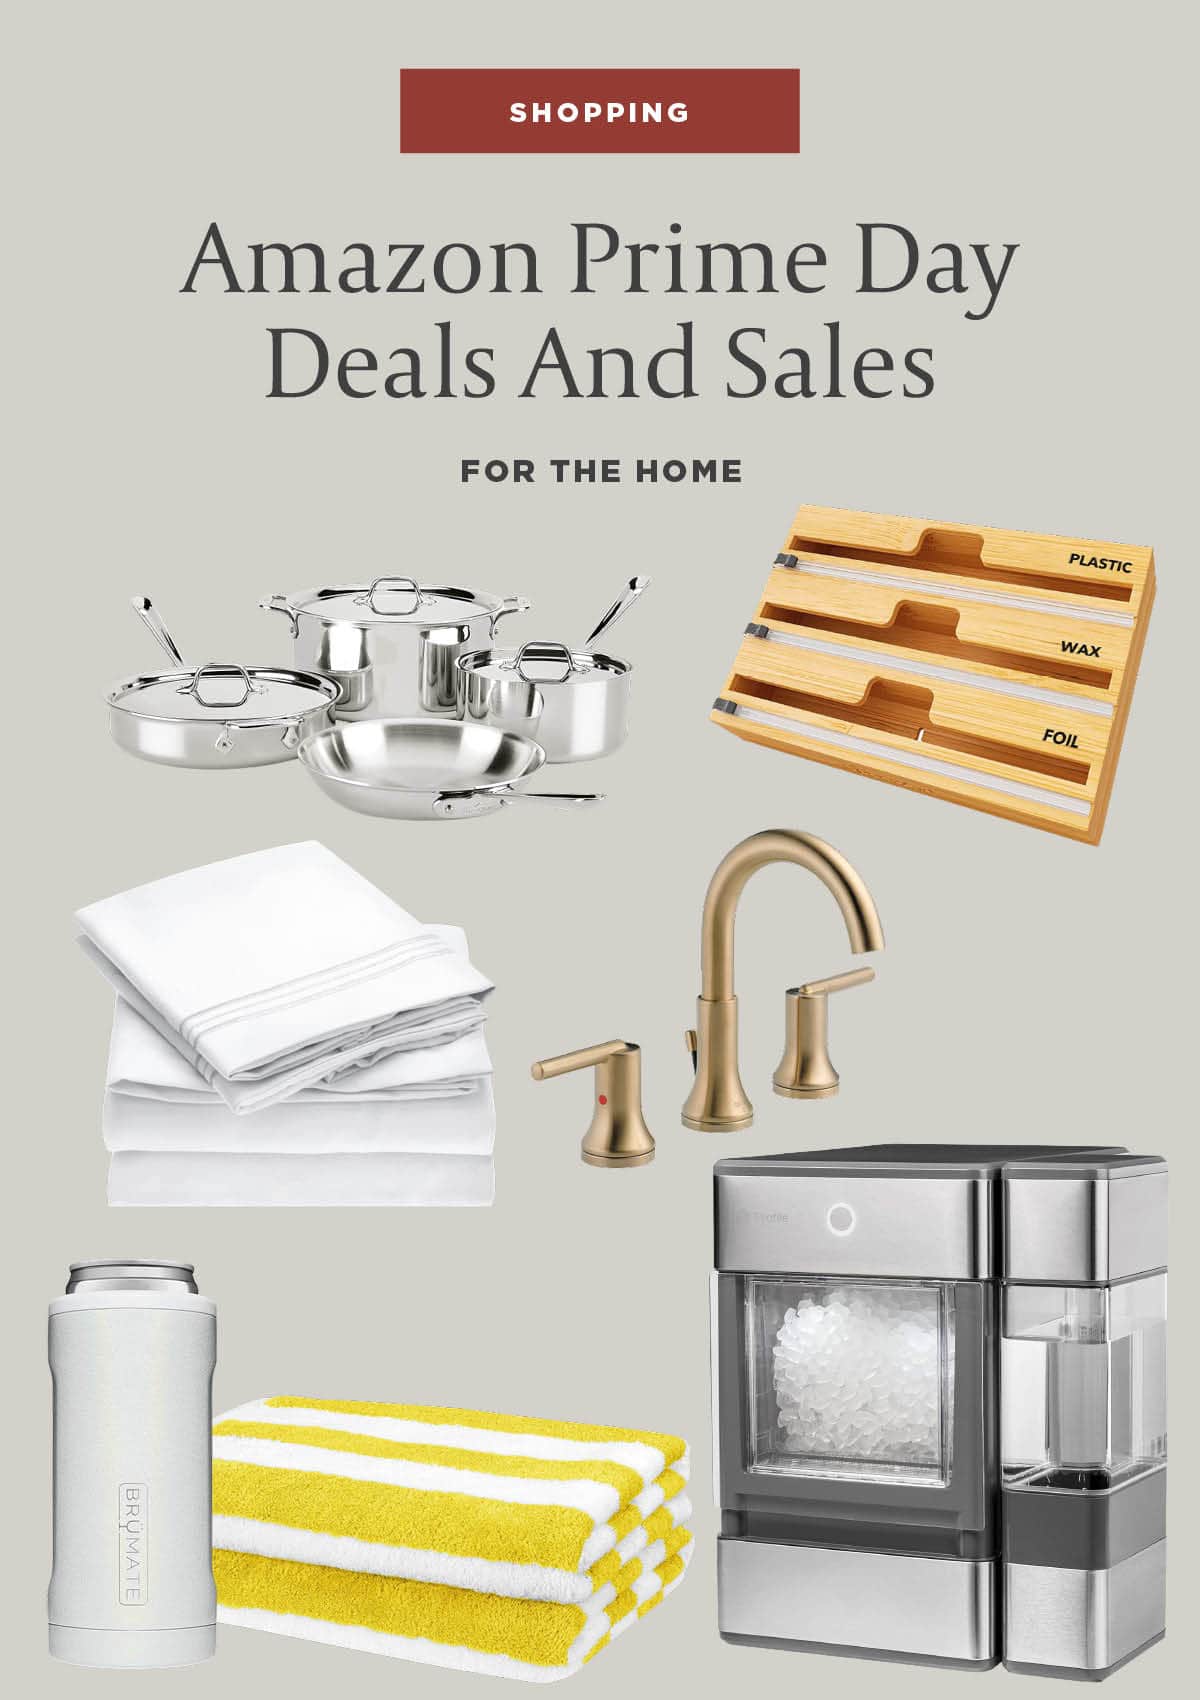 Sharing the Best Amazon Prime Day Deals on home decor, small appliances, smart vacuums and more. These deals won't last long.